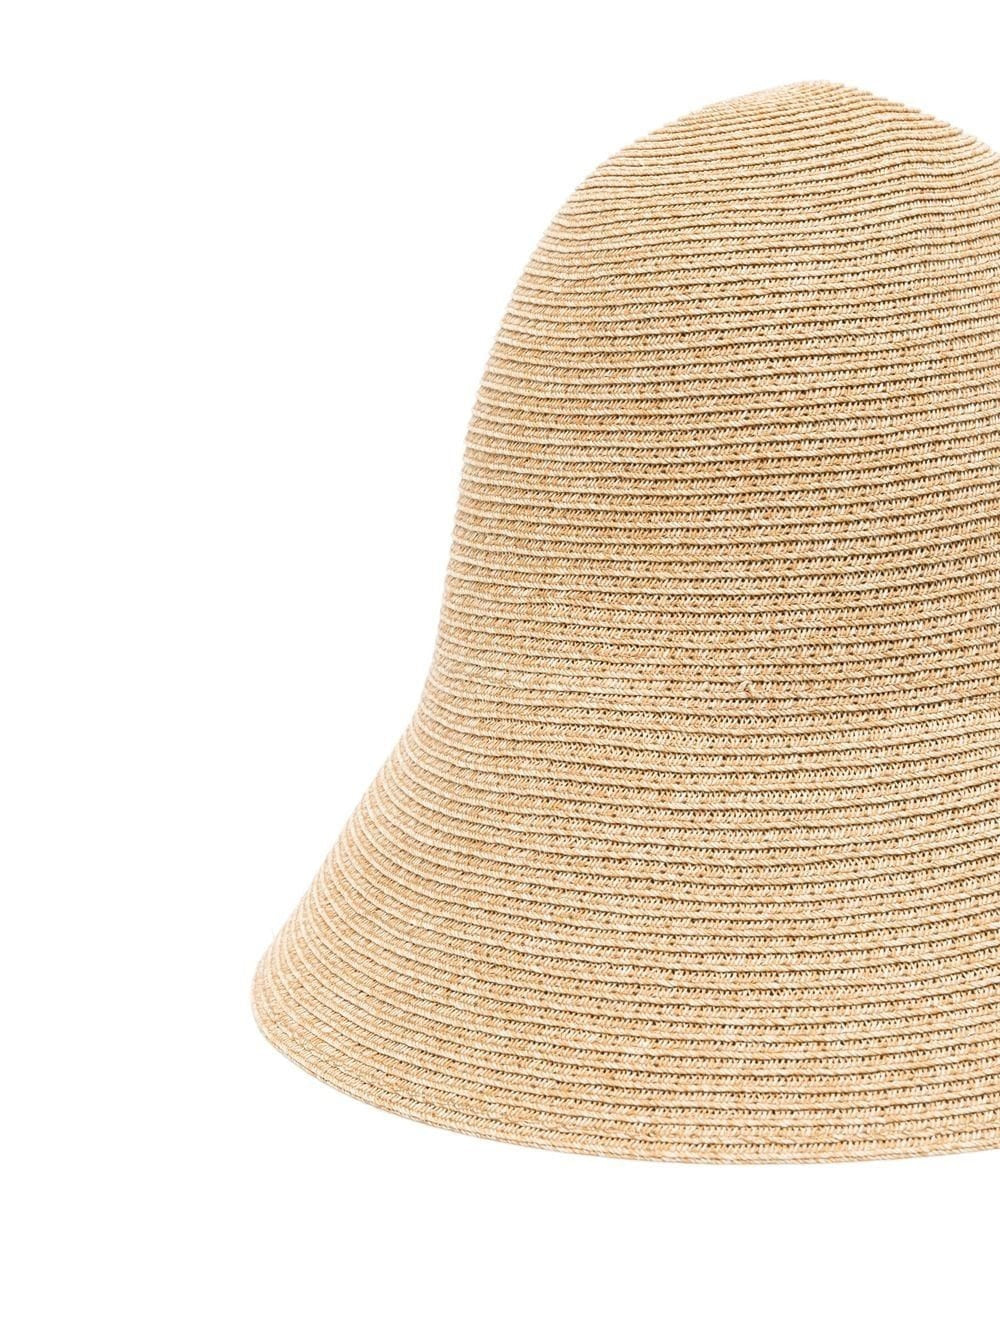 TOTEME-Woven Paper-Blend Straw Hat-2327041812 CREME 105